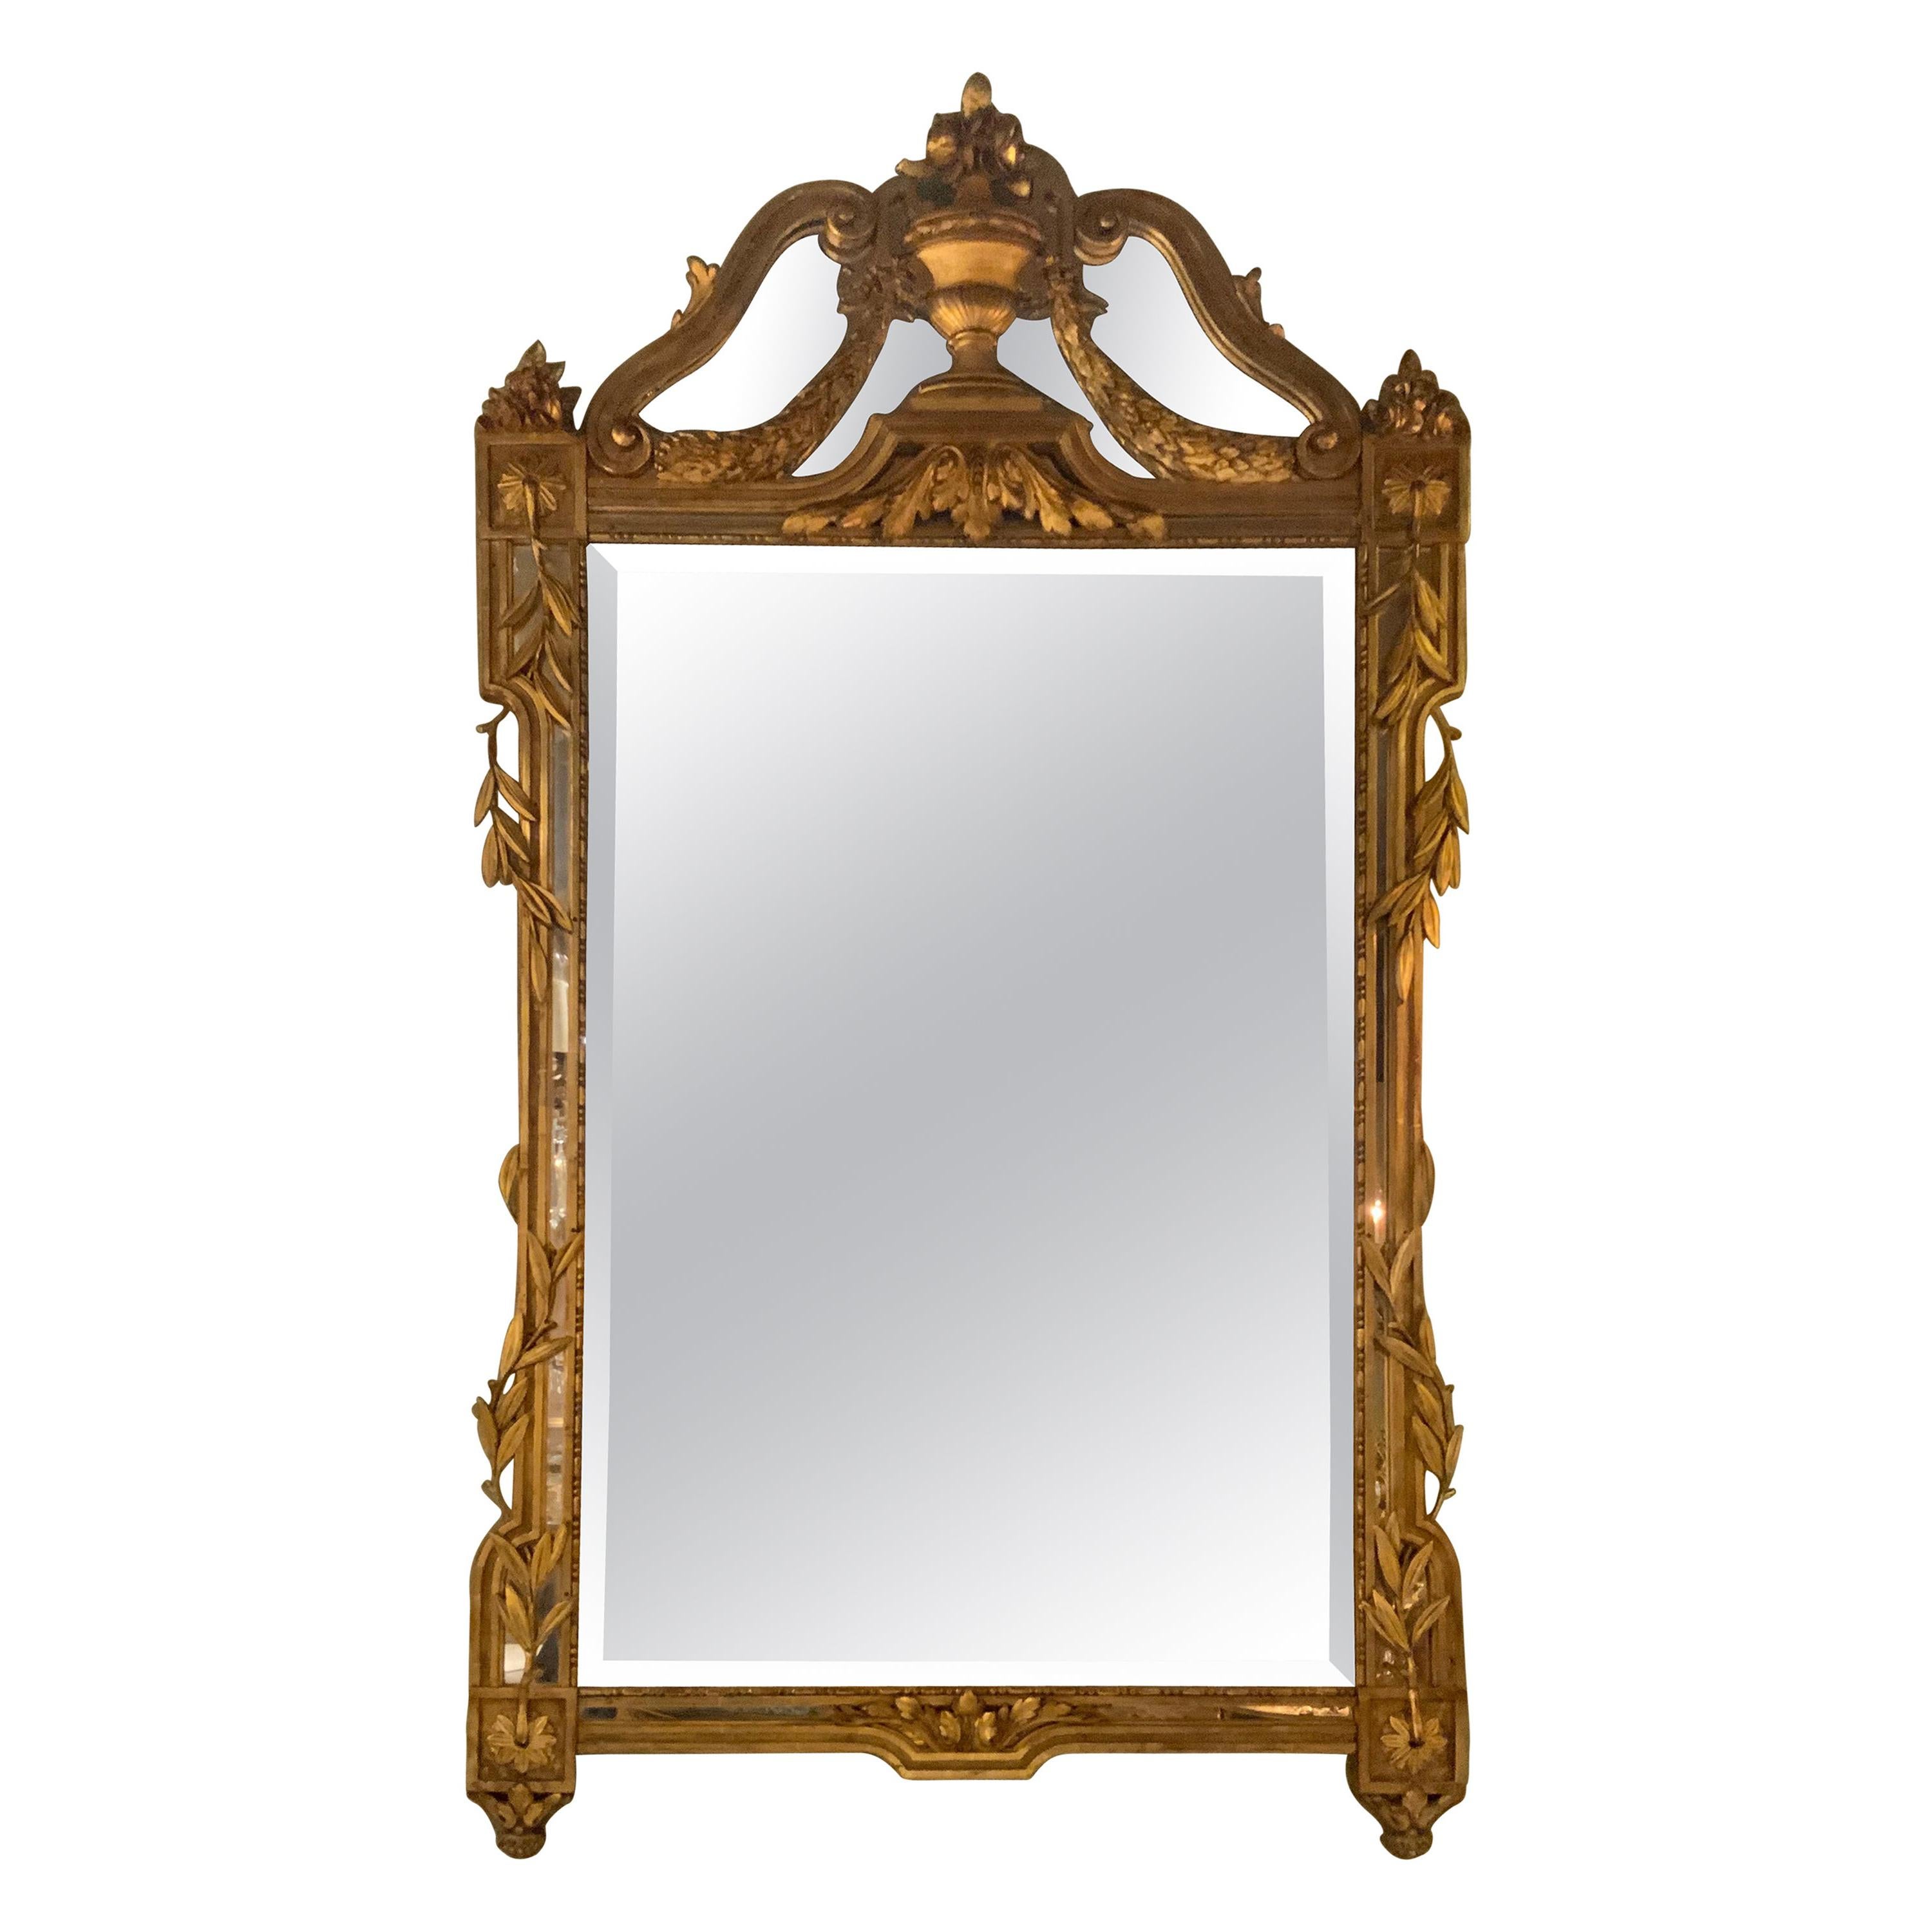 French Giltwood Mirror, 19th C. Beveled with Urn and Foliate Designs